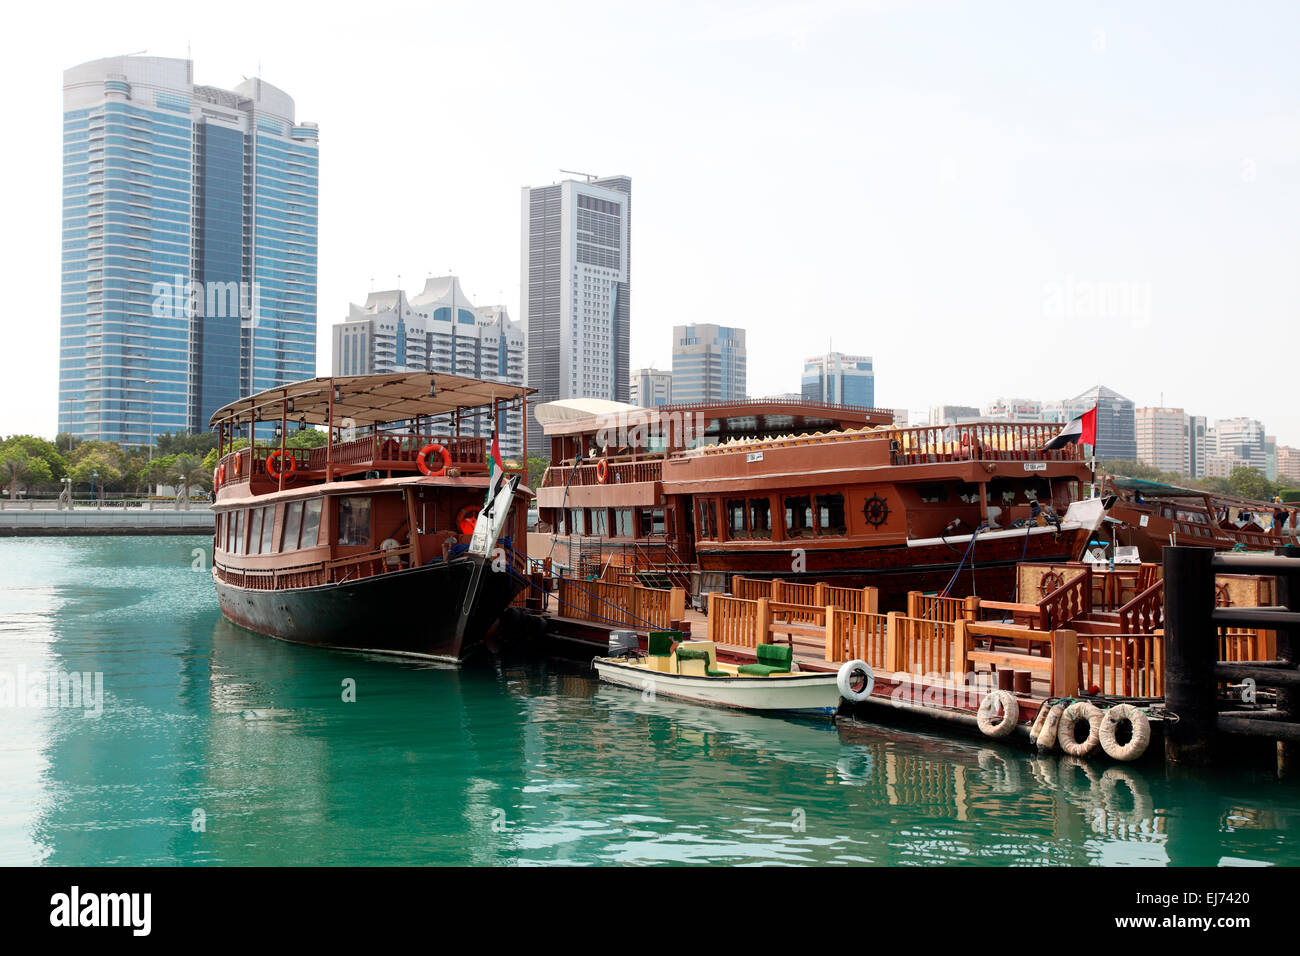 Abu Dhabi dinner cruise vessels Dhow Harbour. Stock Photo